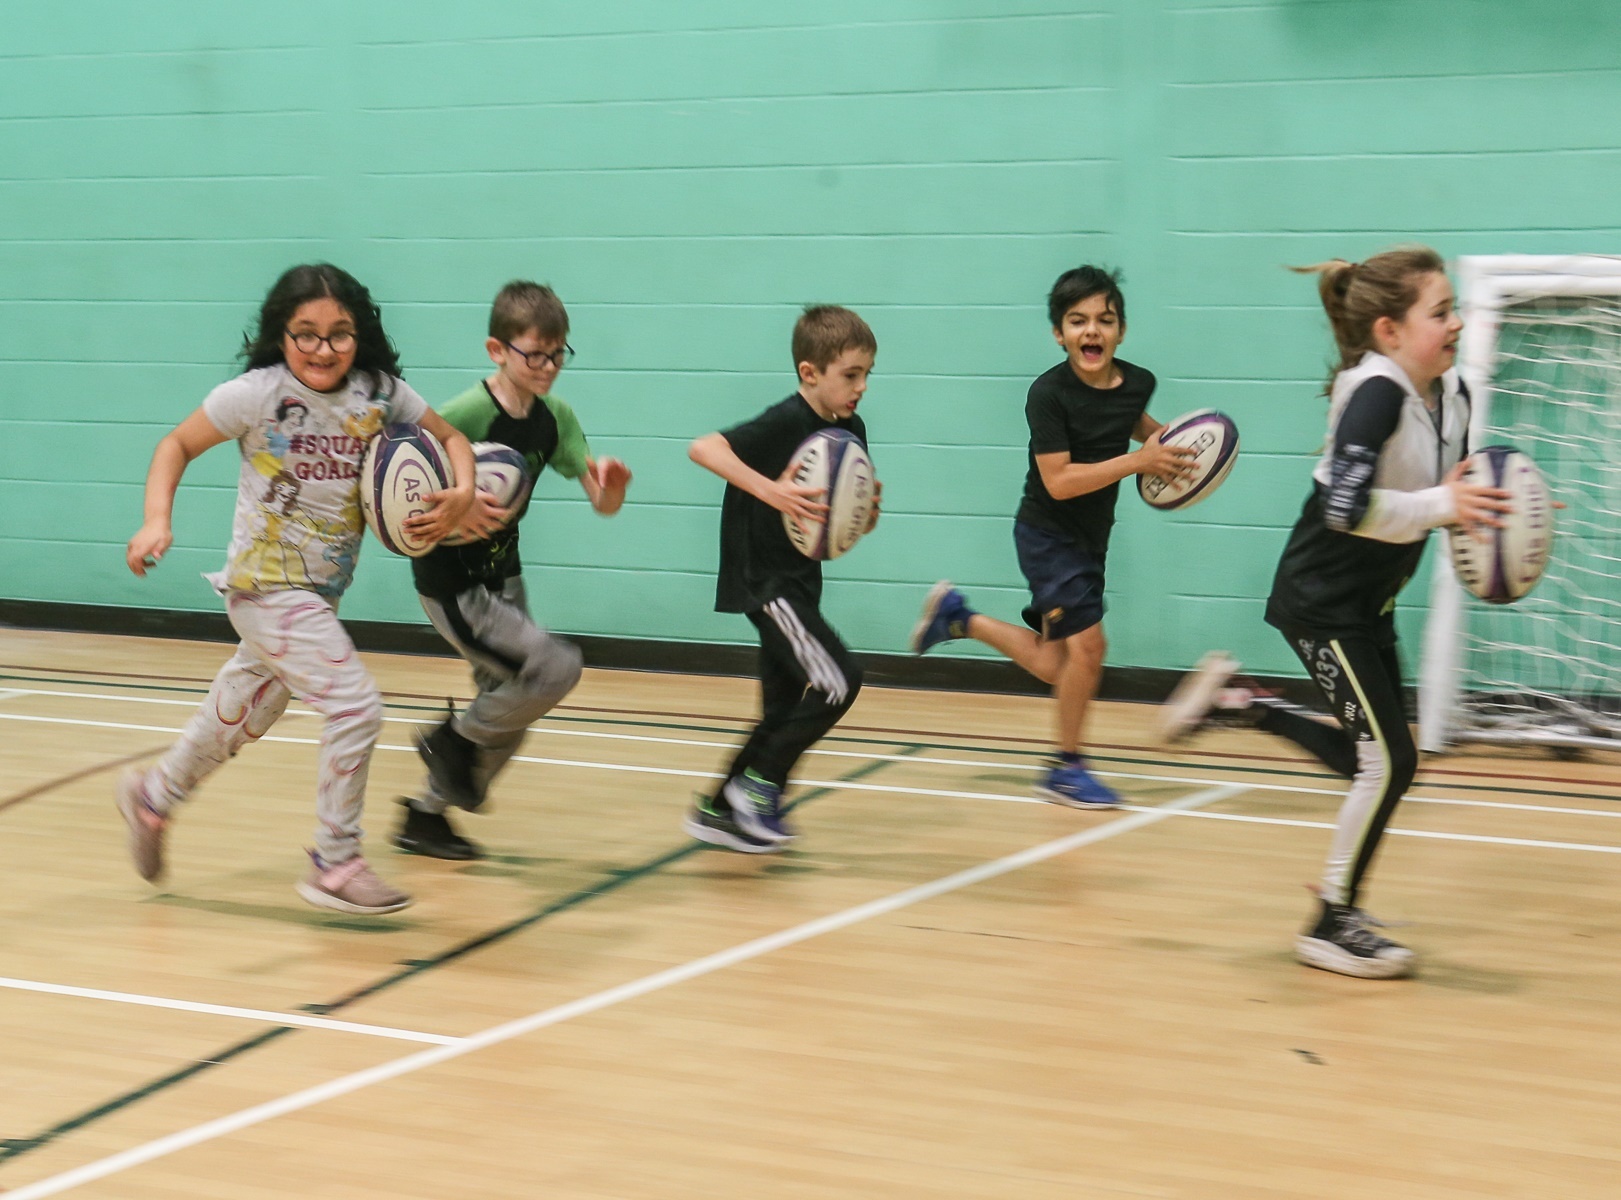 Rugby is part of active schools engagement in Fife